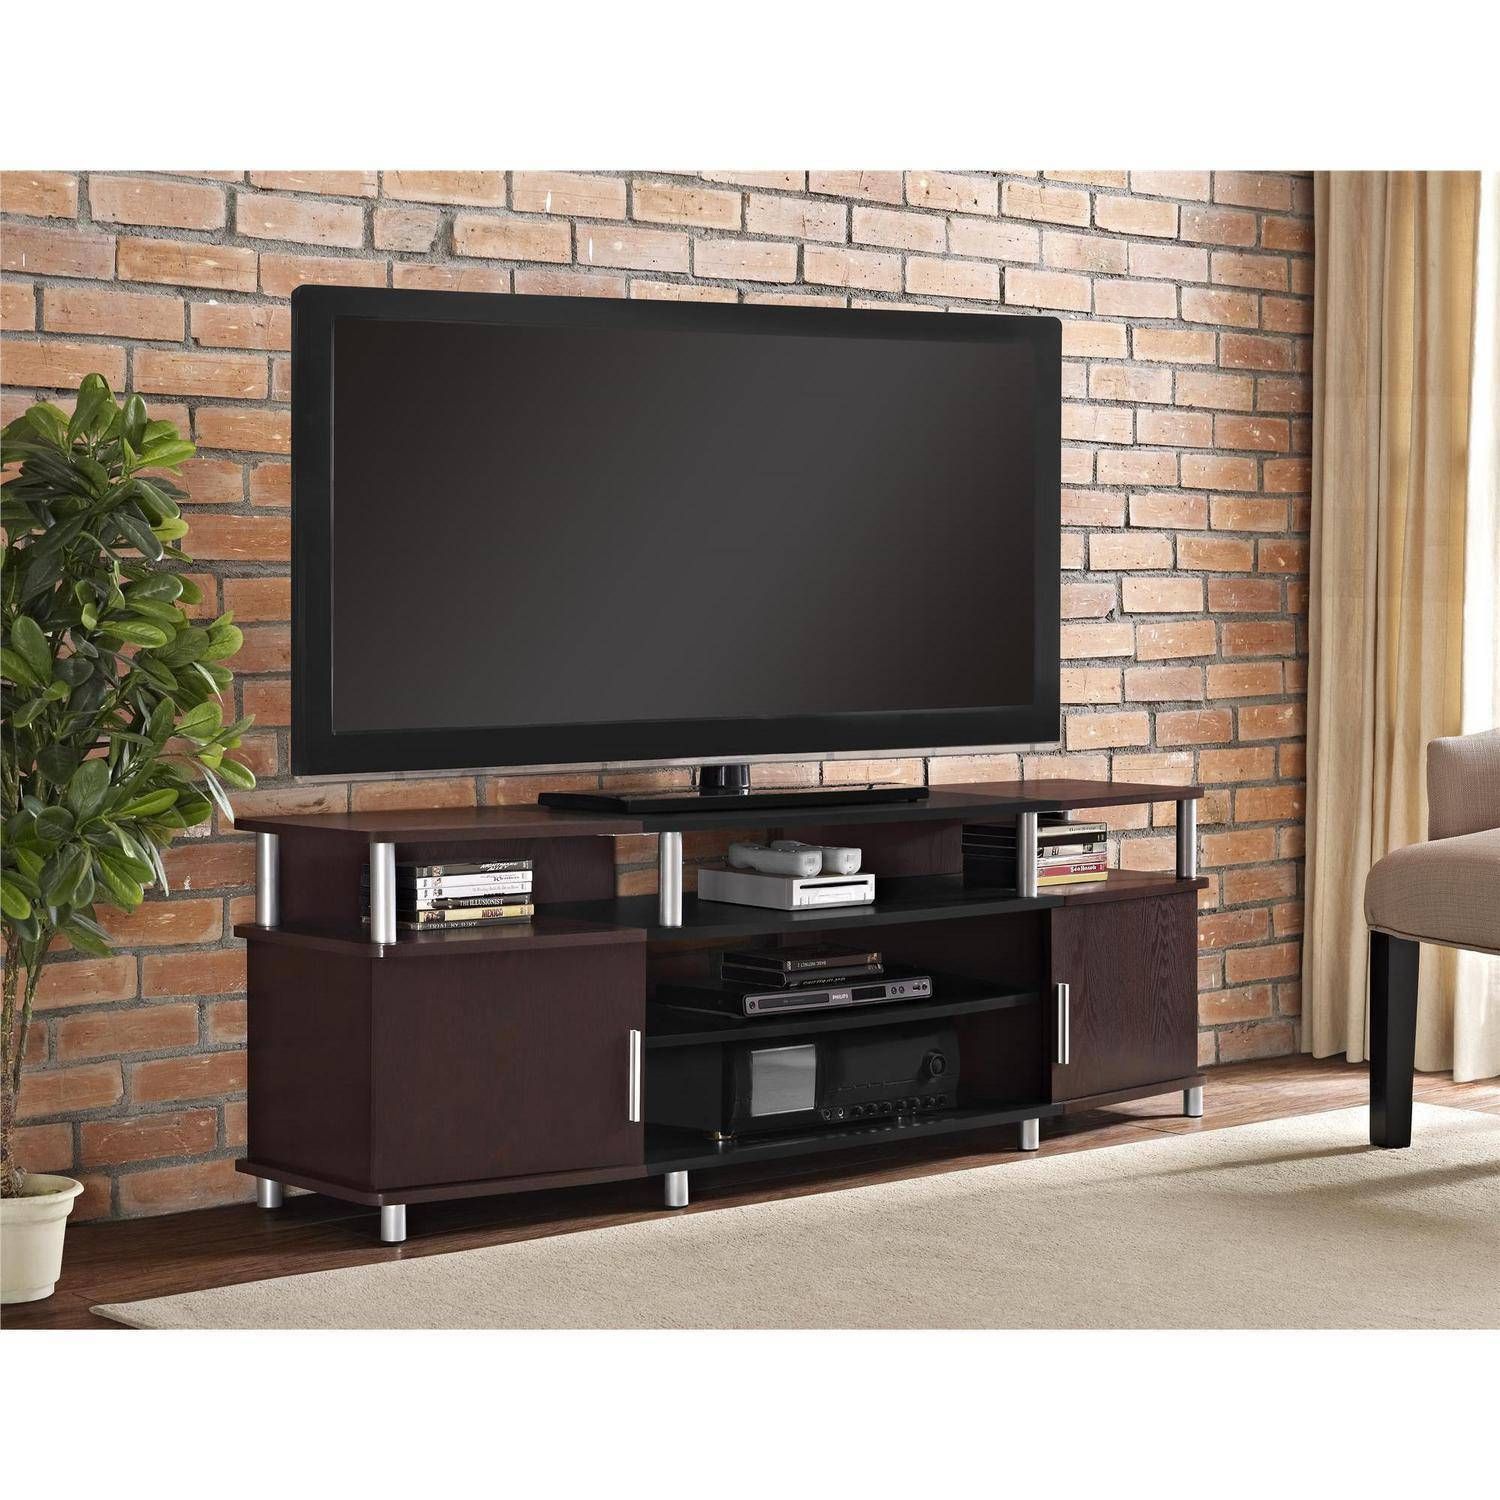 Carson Tv Stand For Tvs Up To 70" Wide, Cherry – Walmart With Light Cherry Tv Stands (View 12 of 15)